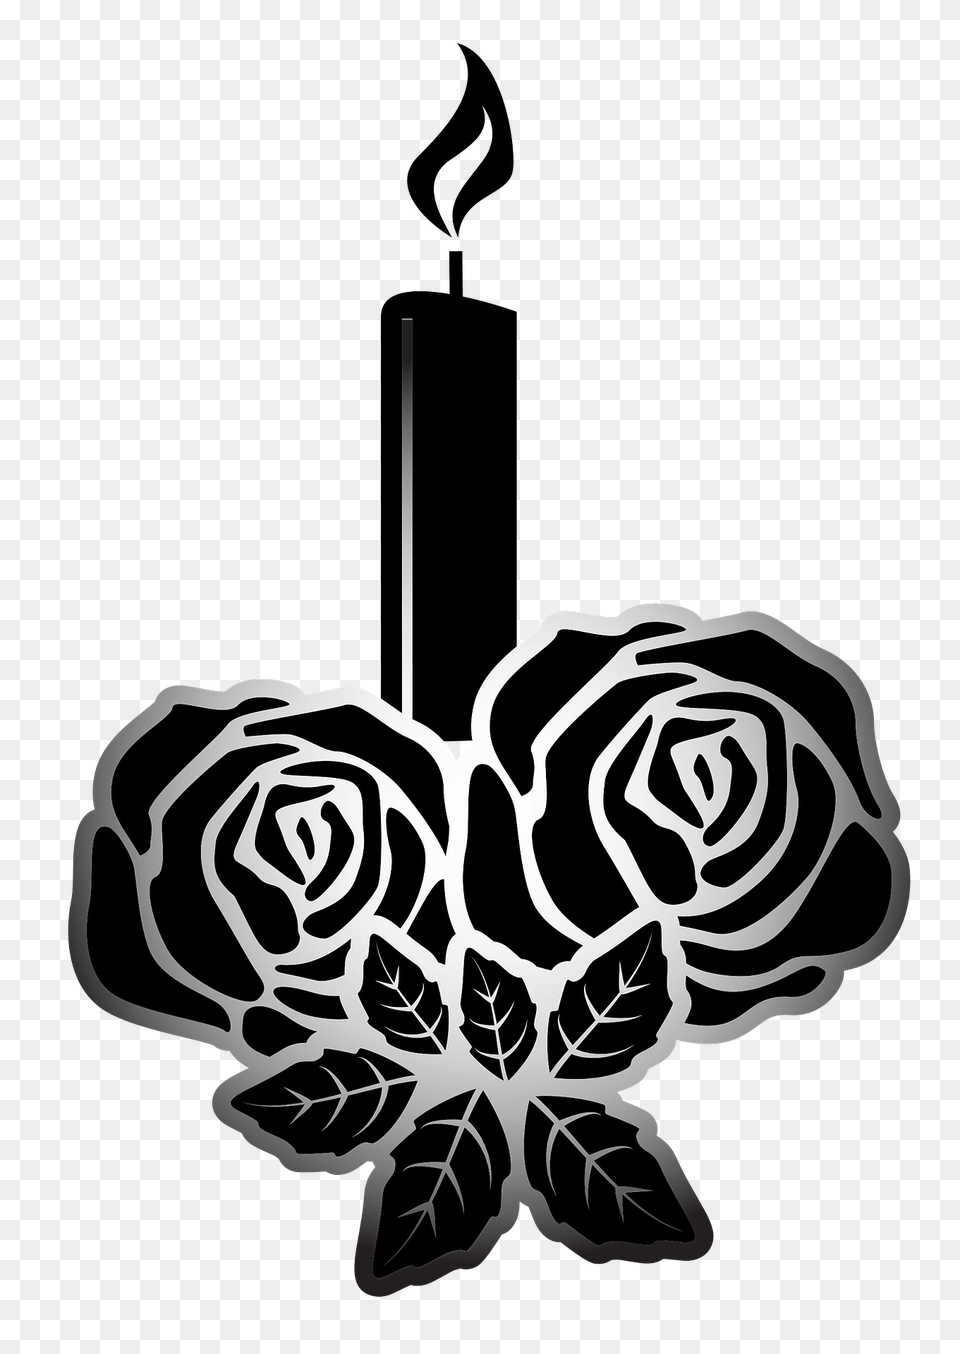 Rose Candle Clipart, Stencil Png Image